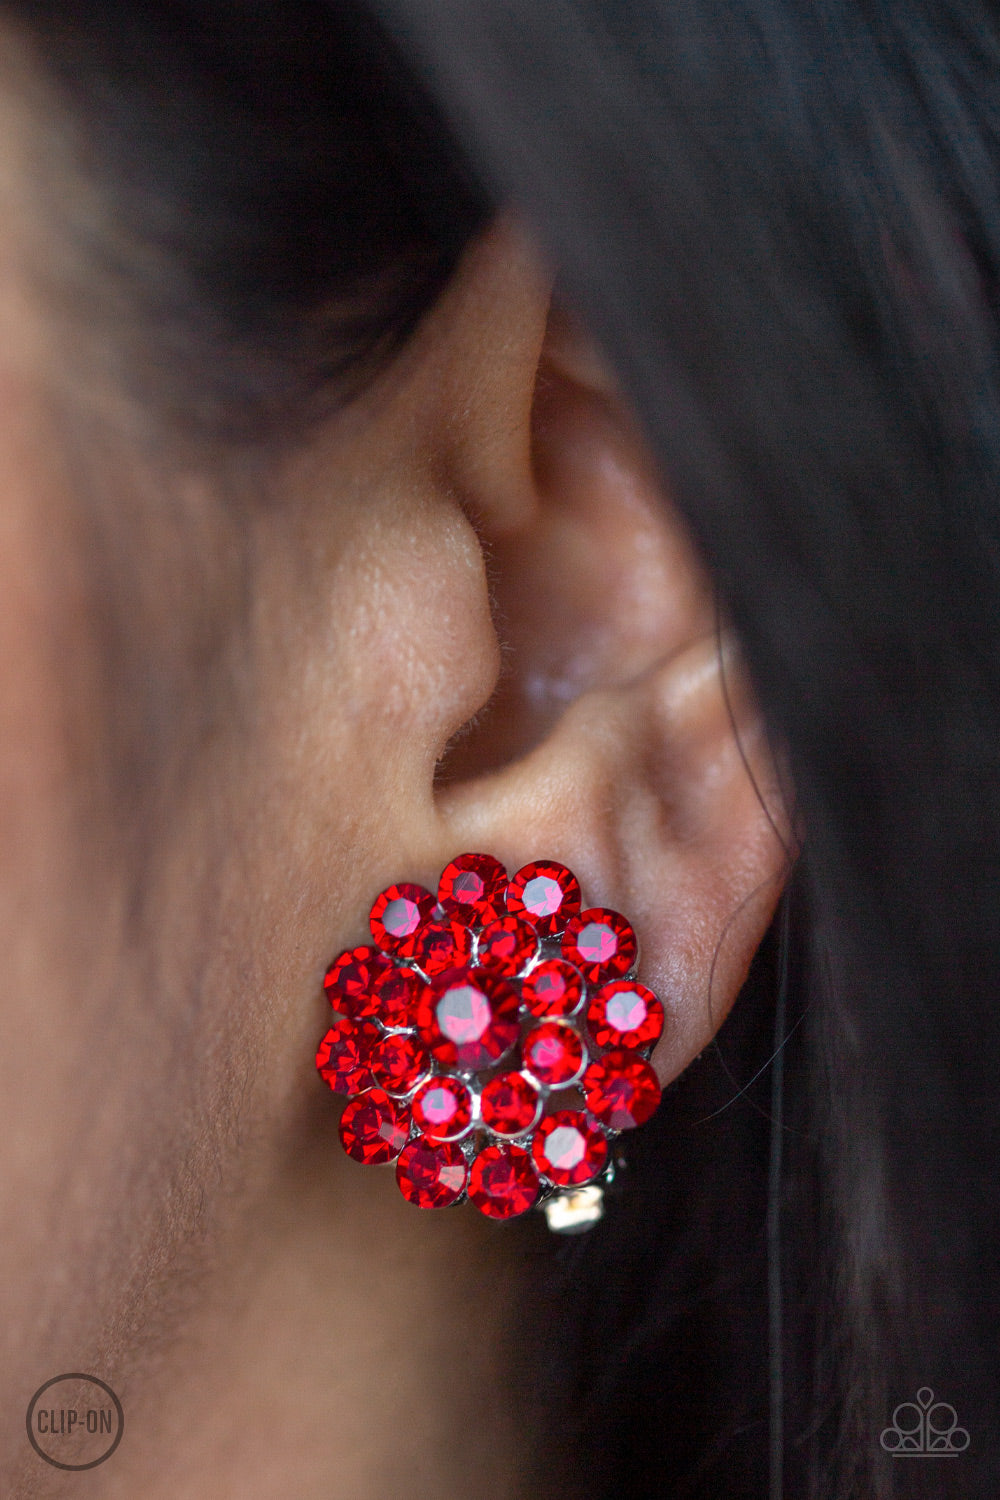 Paparazzi Accessories - Glammed Out - Red Earrings